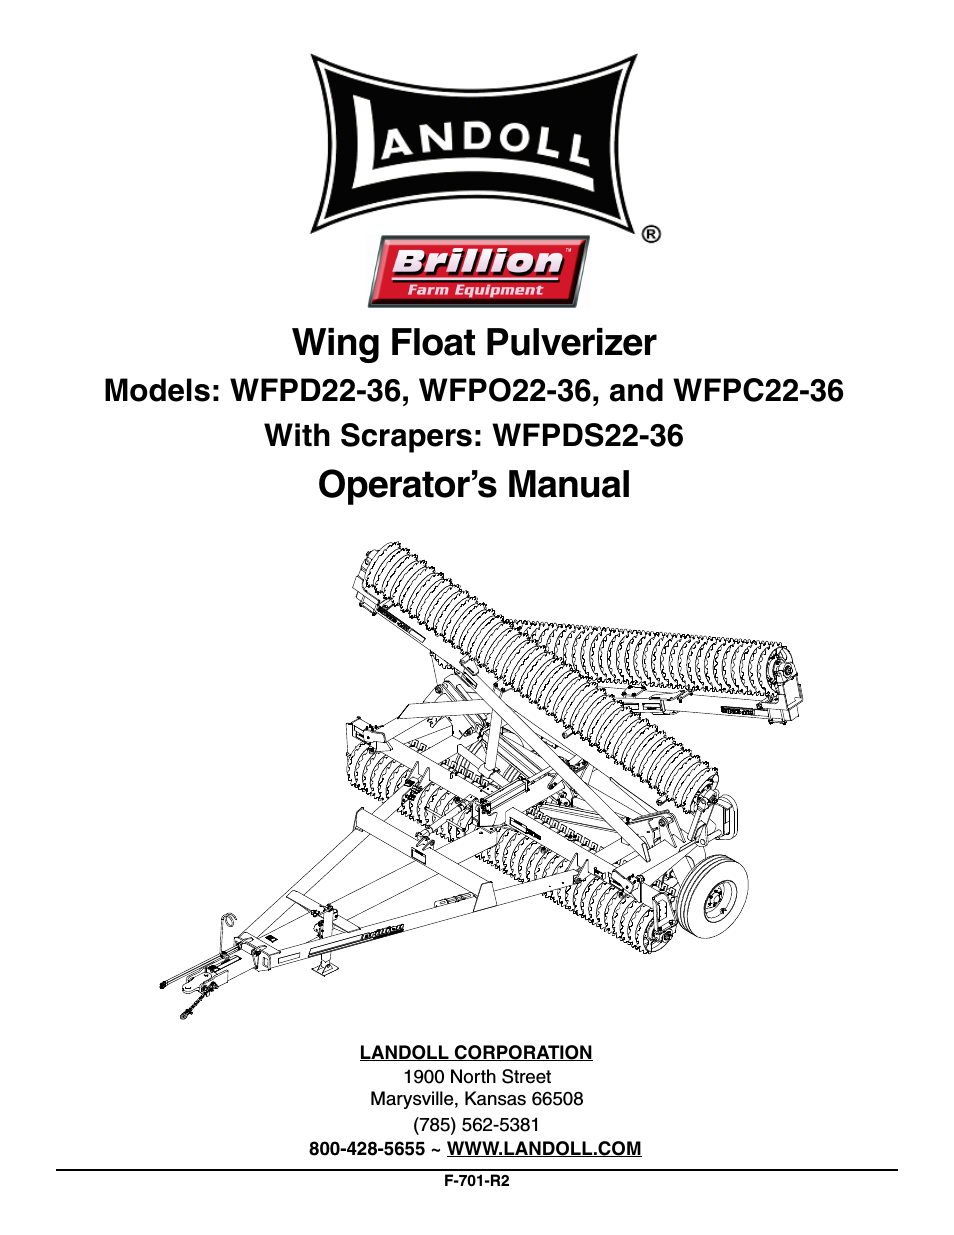 WFPC22-36 Wing Float Pulverizer